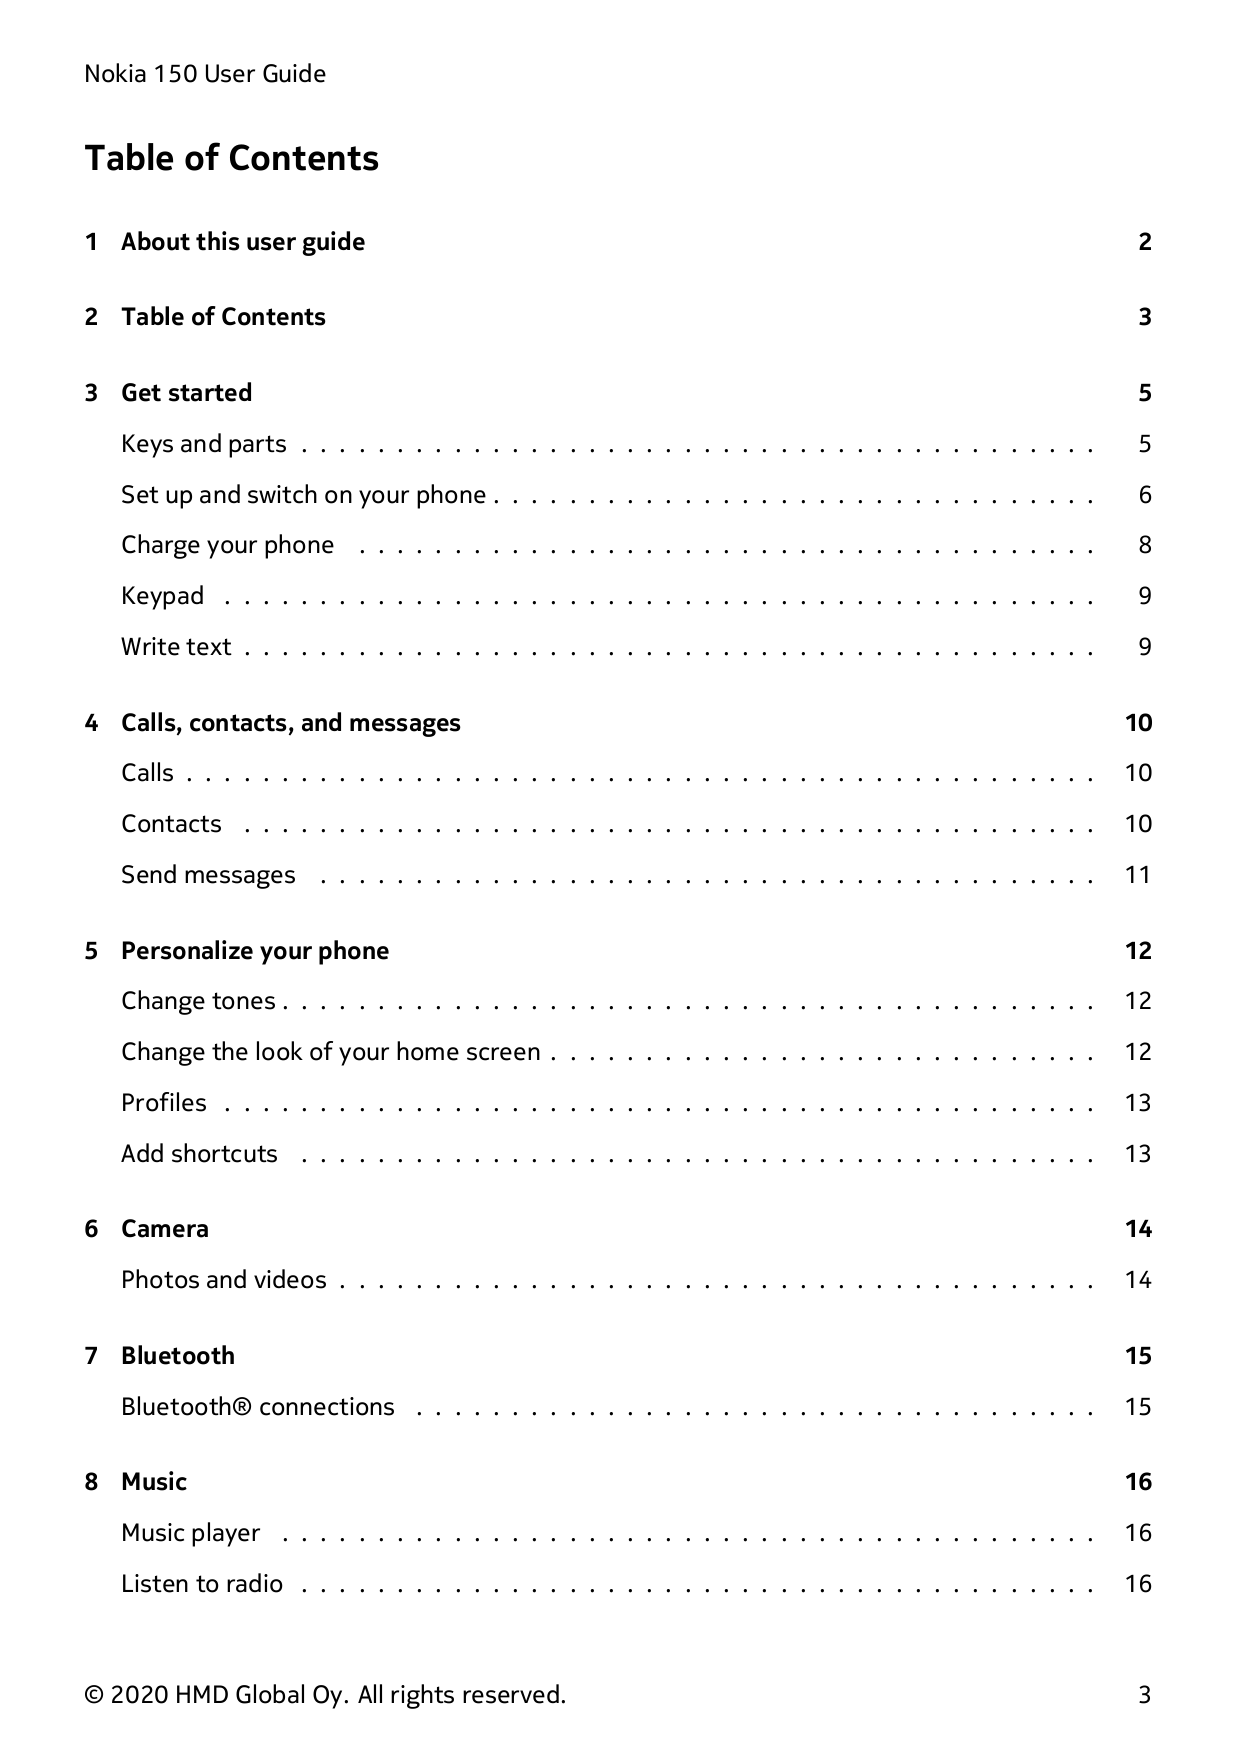 Nokia 150 User GuideTable of Contents1 About this user guide22 Table of Contents33 Get started5Keys and parts . . . . . . . . . 